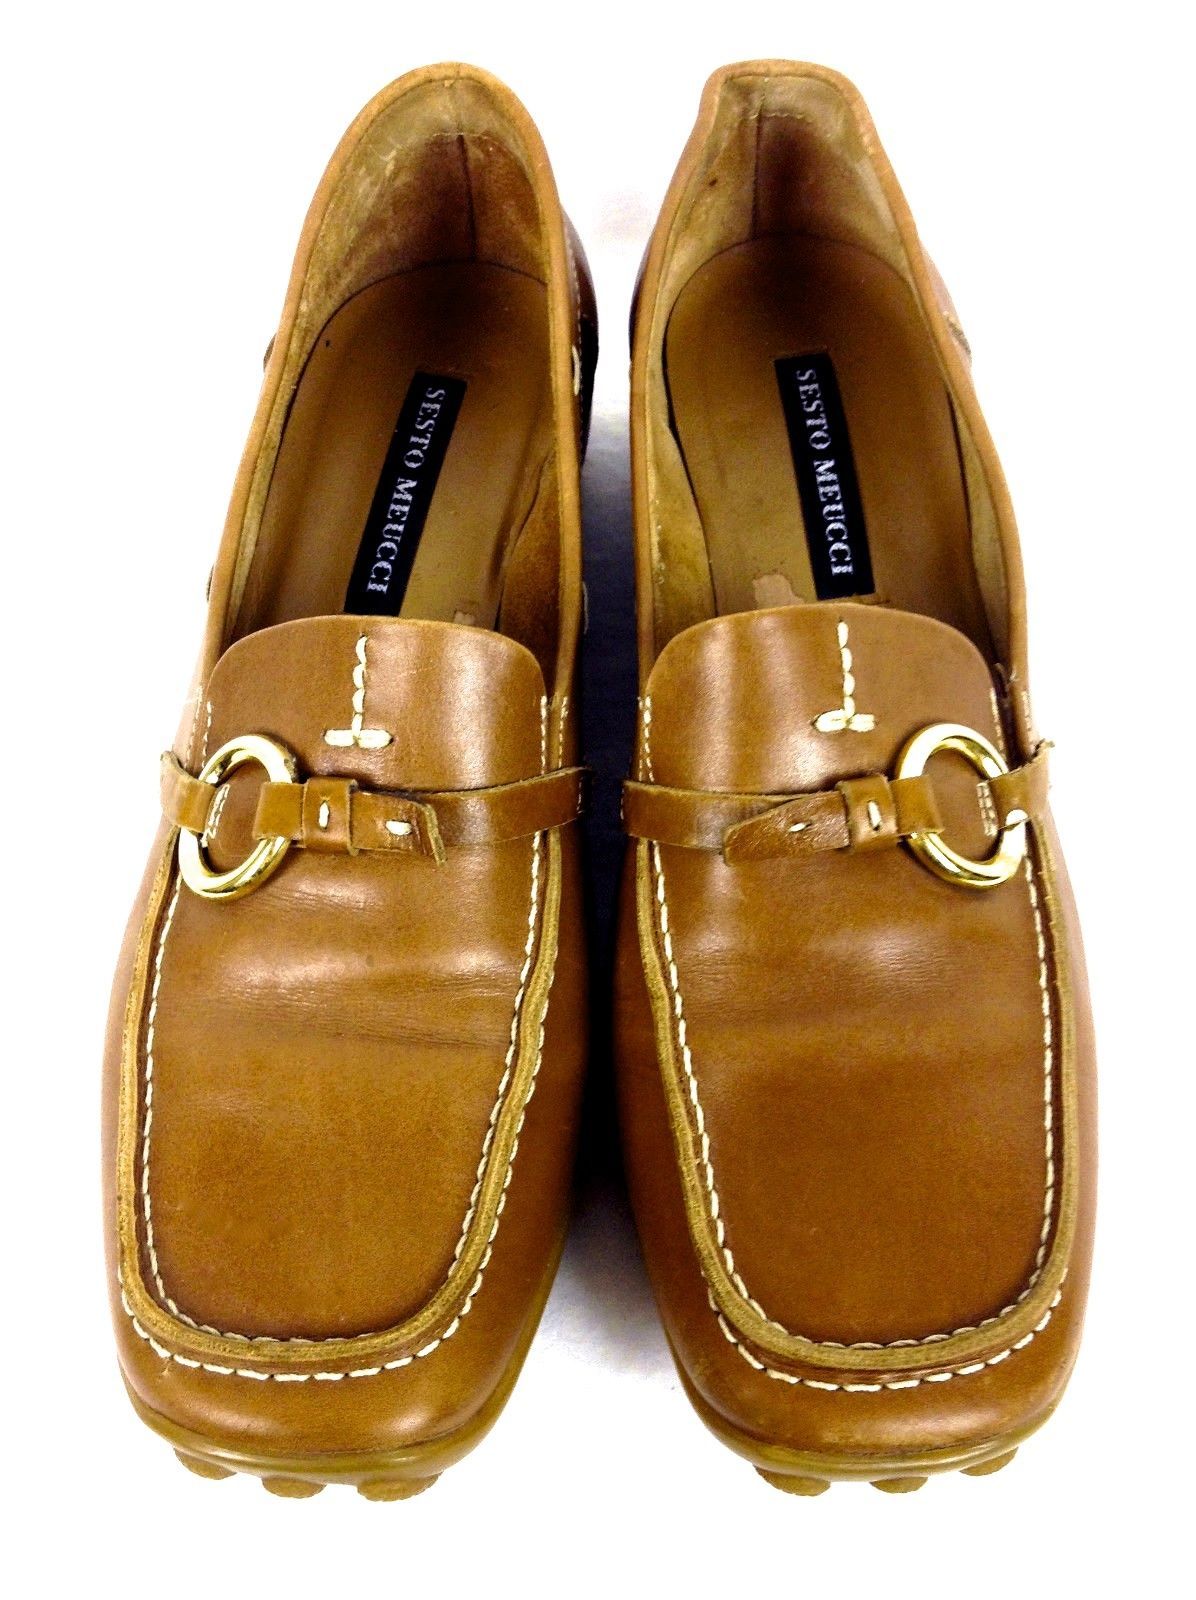 Sesto Meucci Shoes 7 Womens Brown Leather Loafers For Sale - Item #1474141